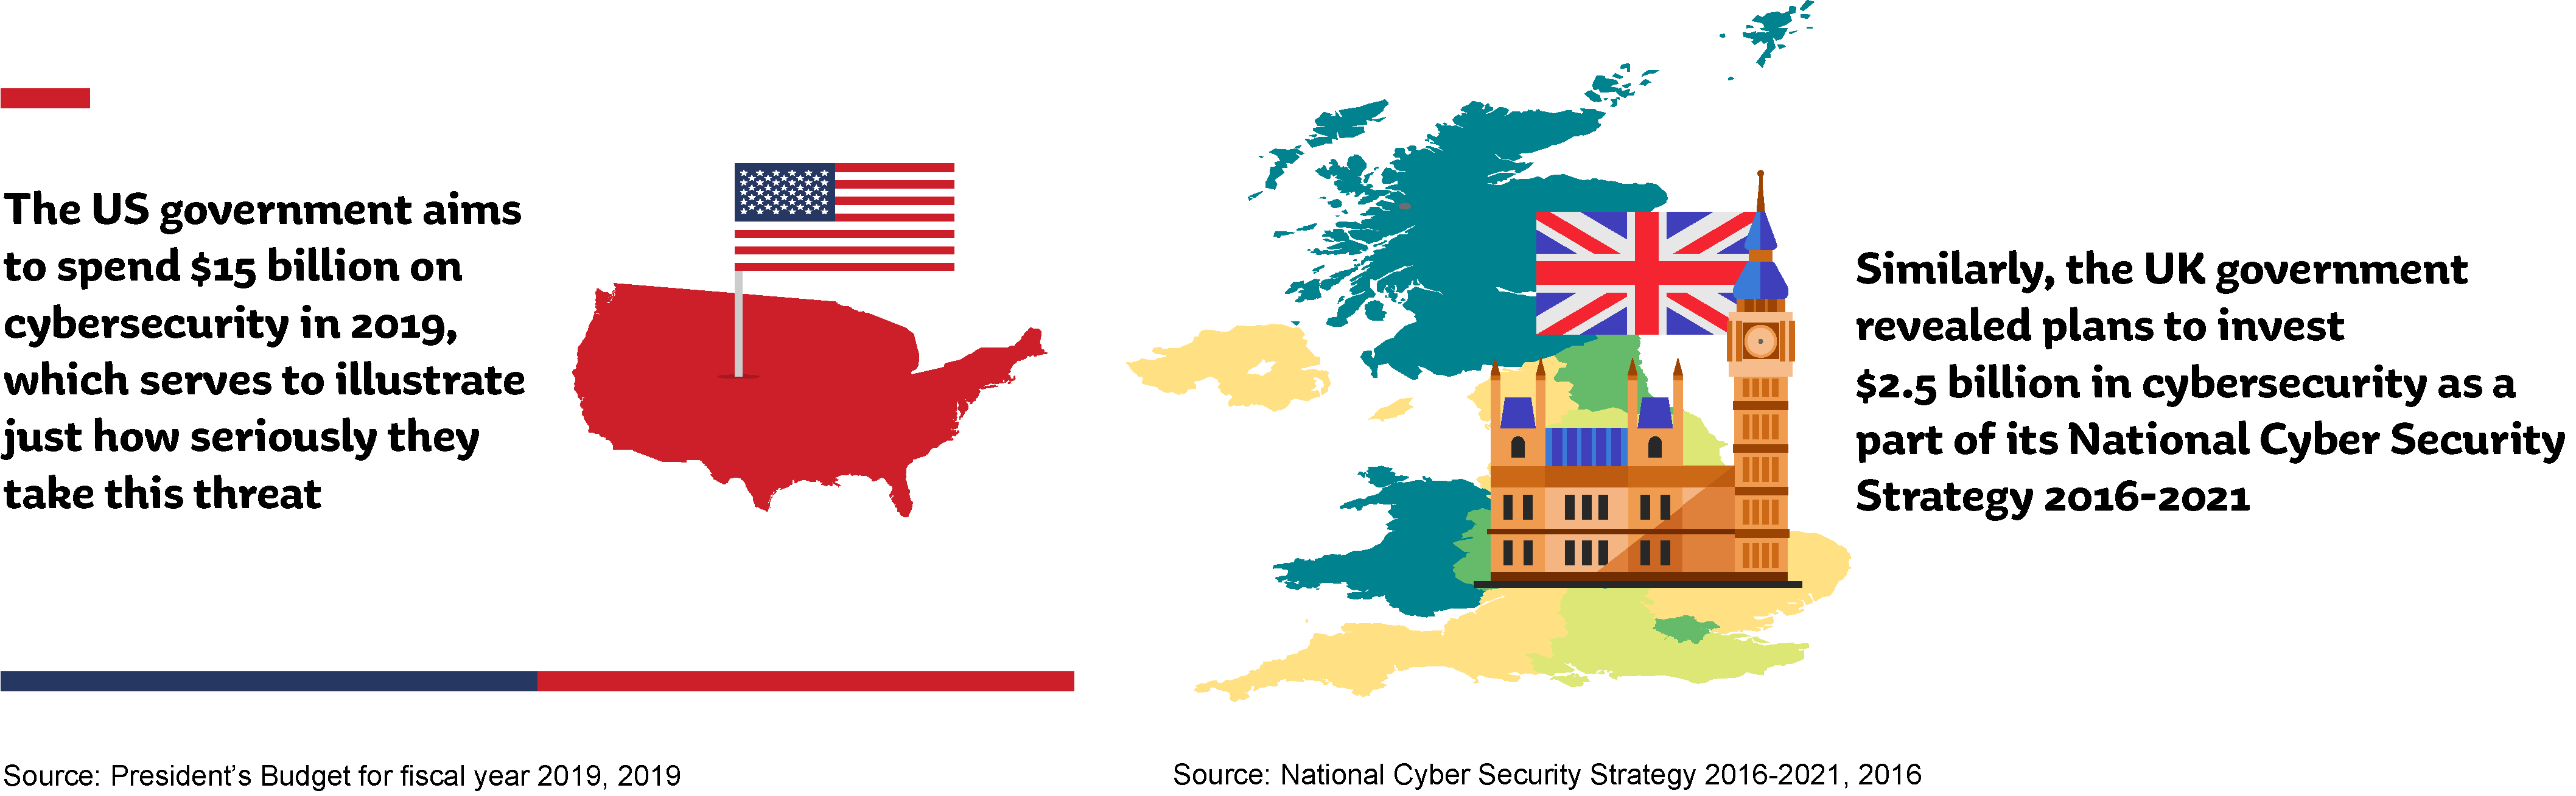  Images showing how much the US and UK governments plan to spend on cybersecurity.